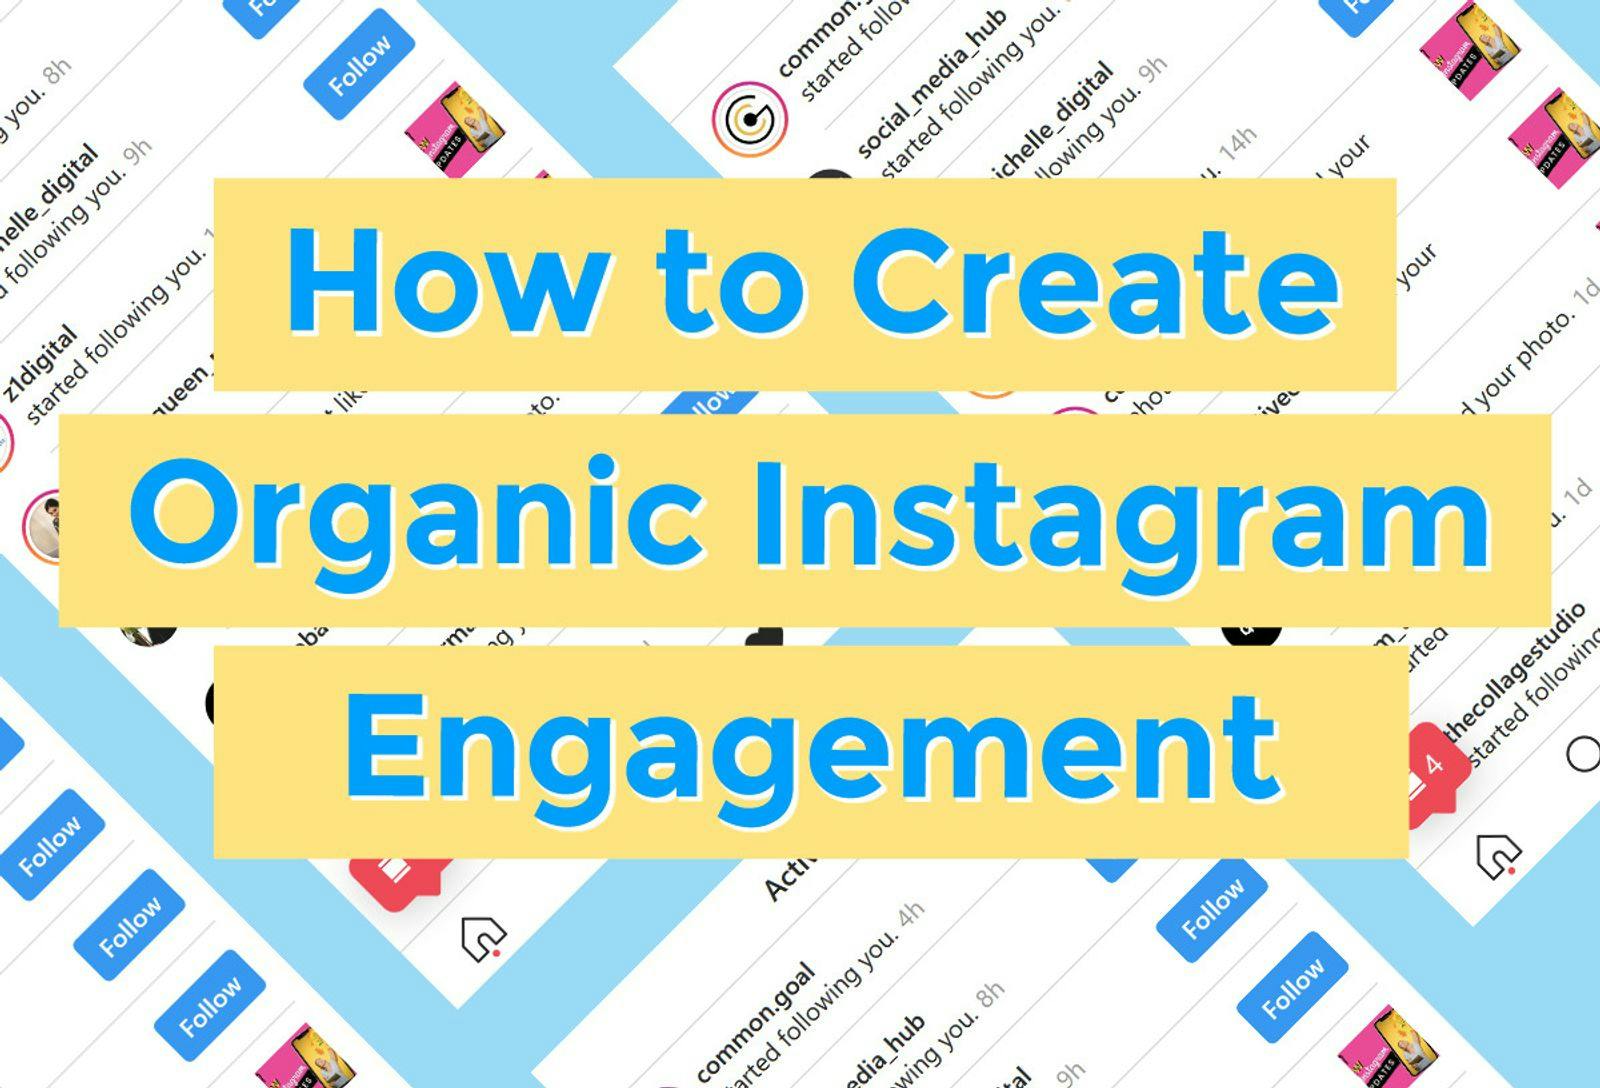 Tips on how to create organic Instagram engagement